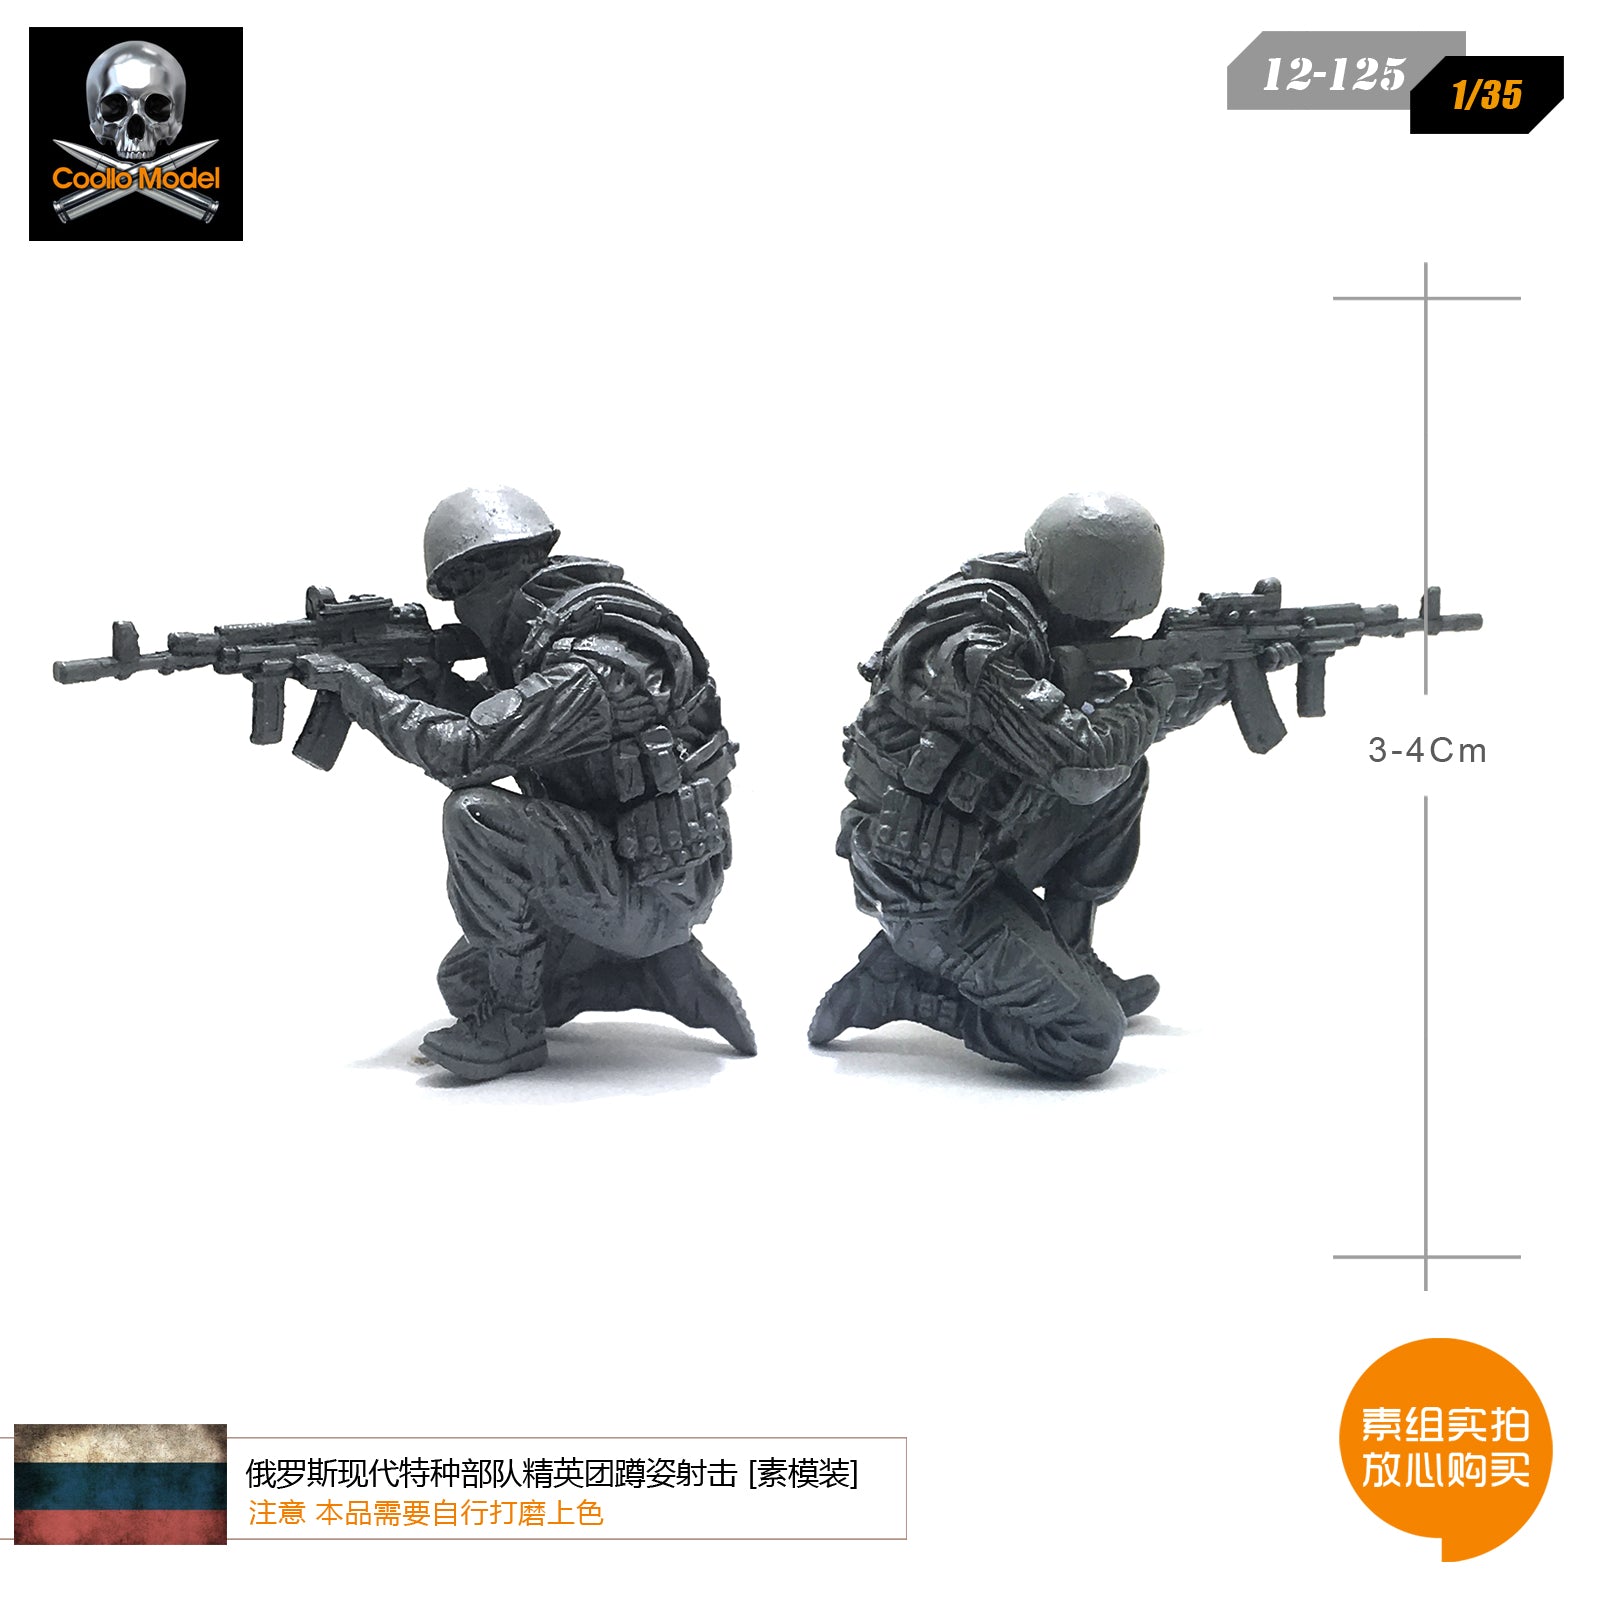 1/35 modern Russian special forces elite group squatting shot soldiers resin model 12-125